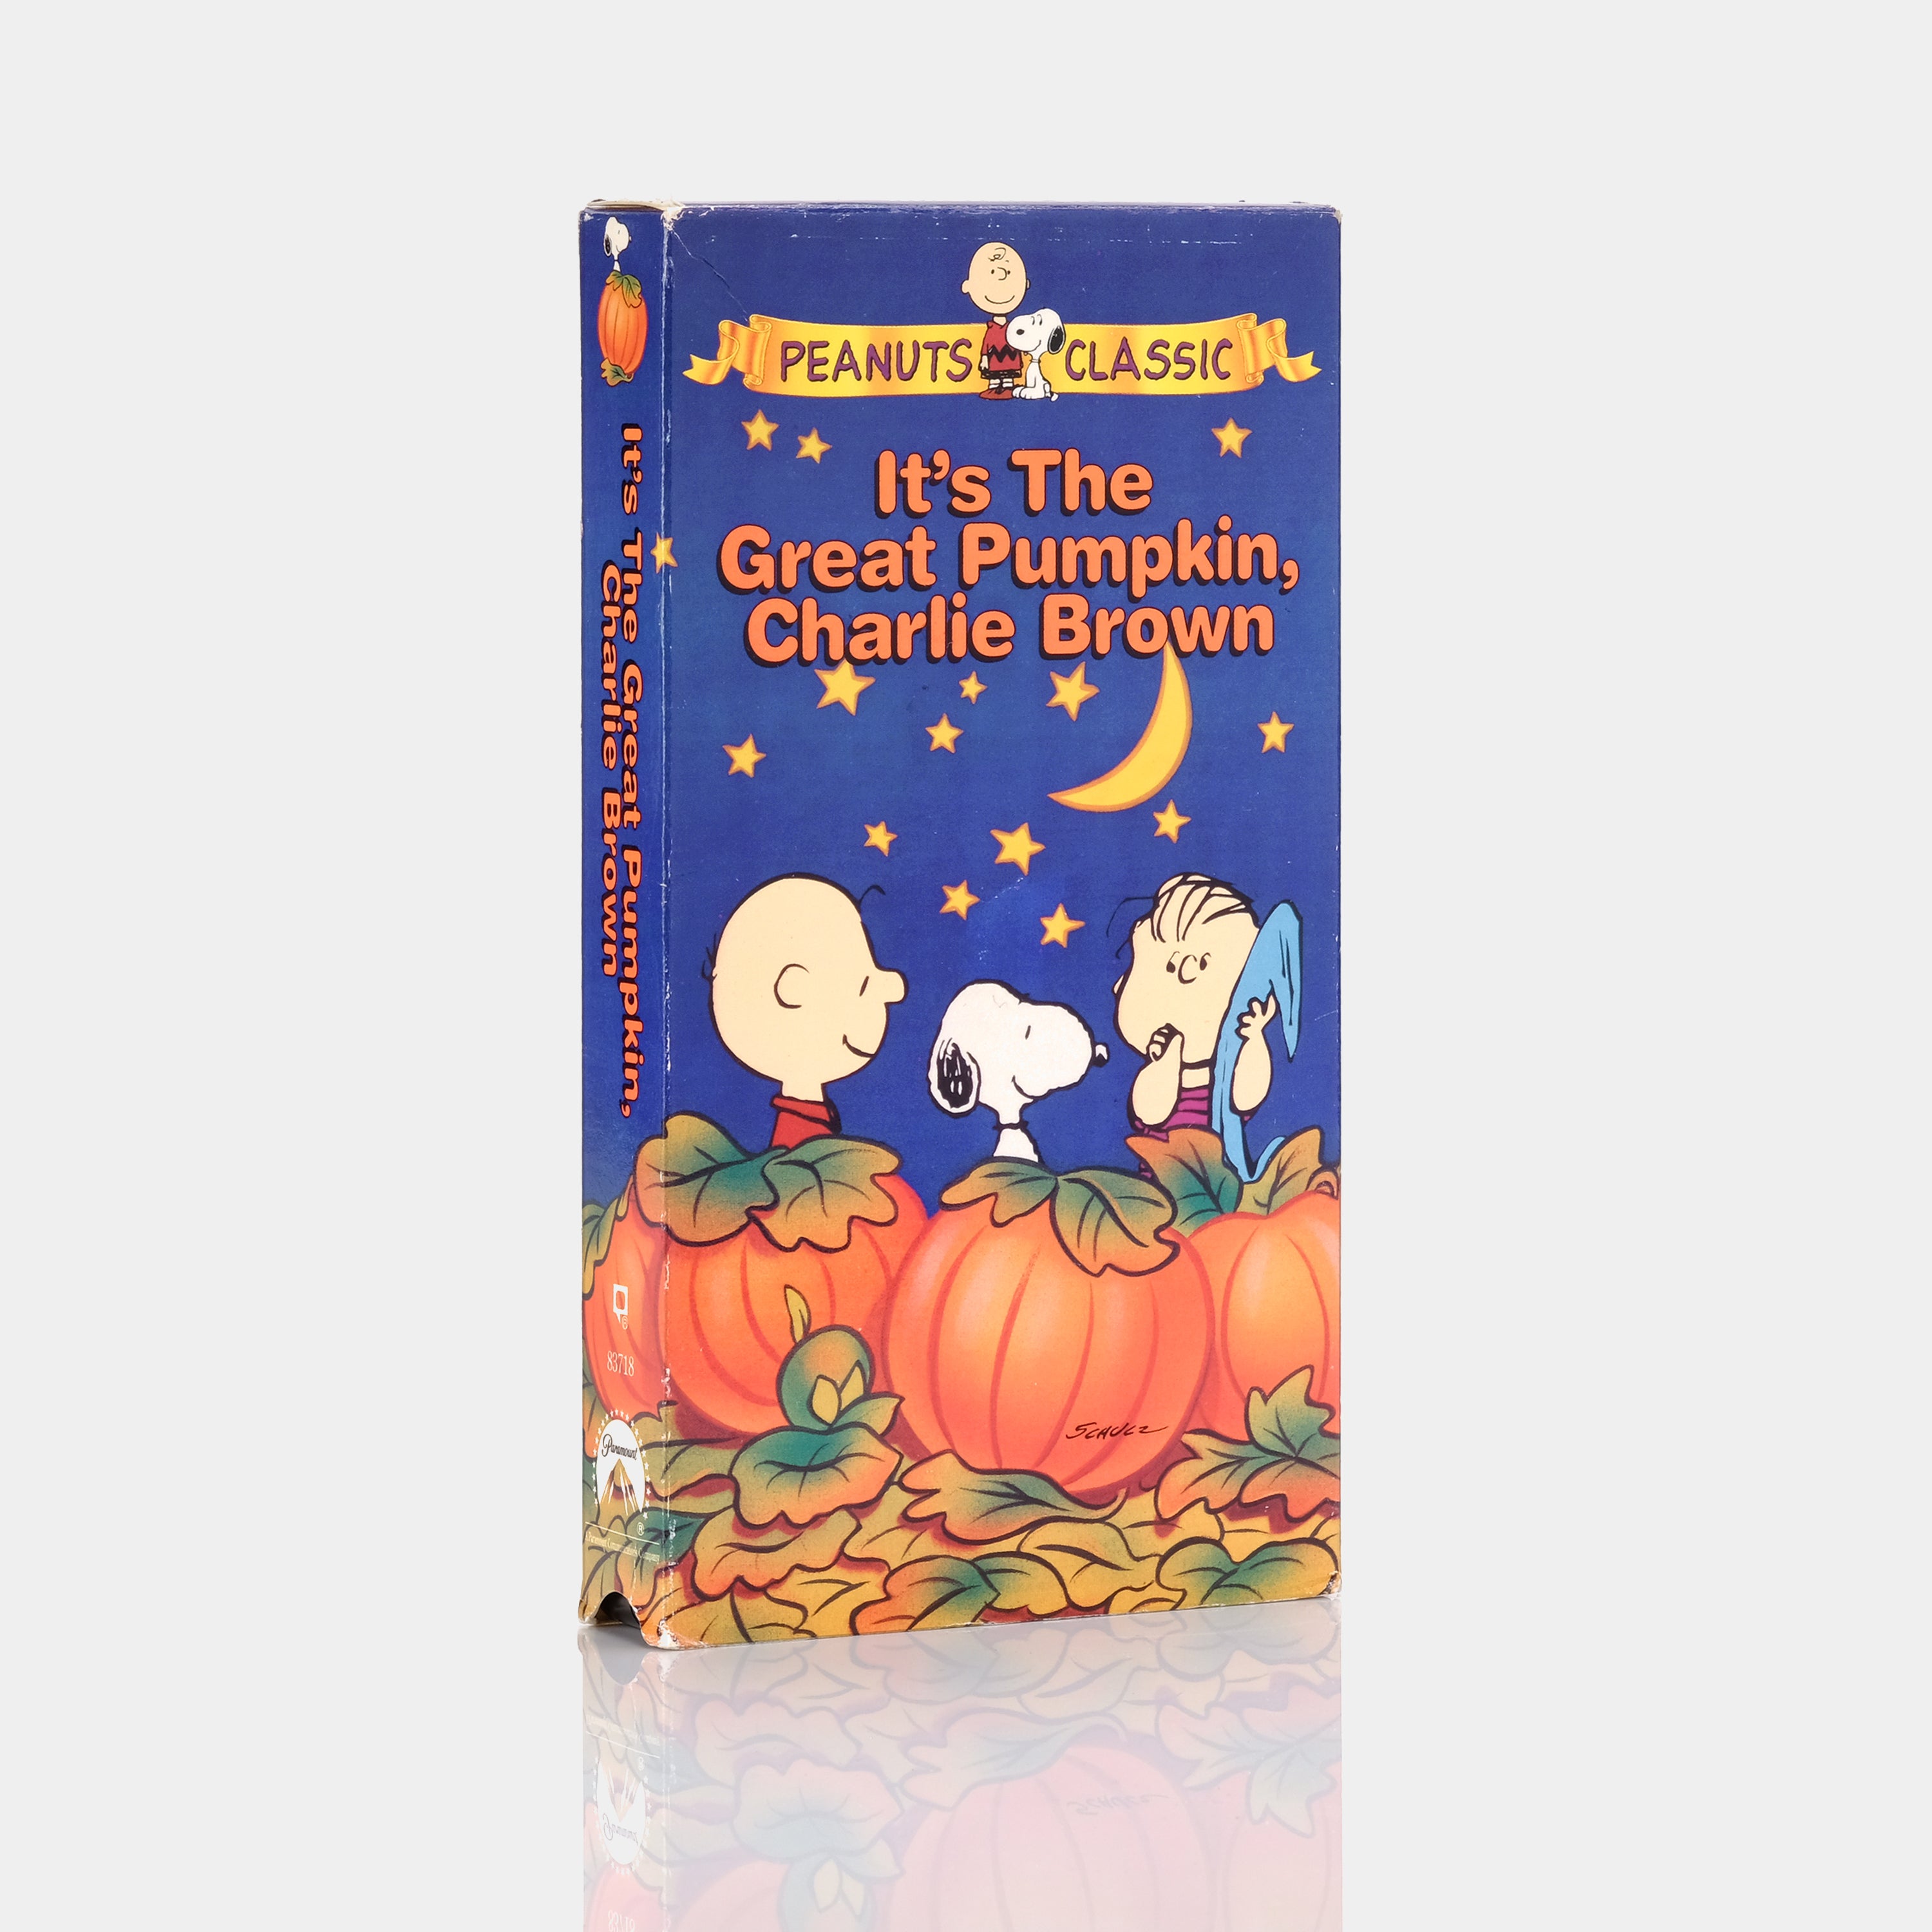 It's the Great Pumpkin, Charlie Brown VHS Tape